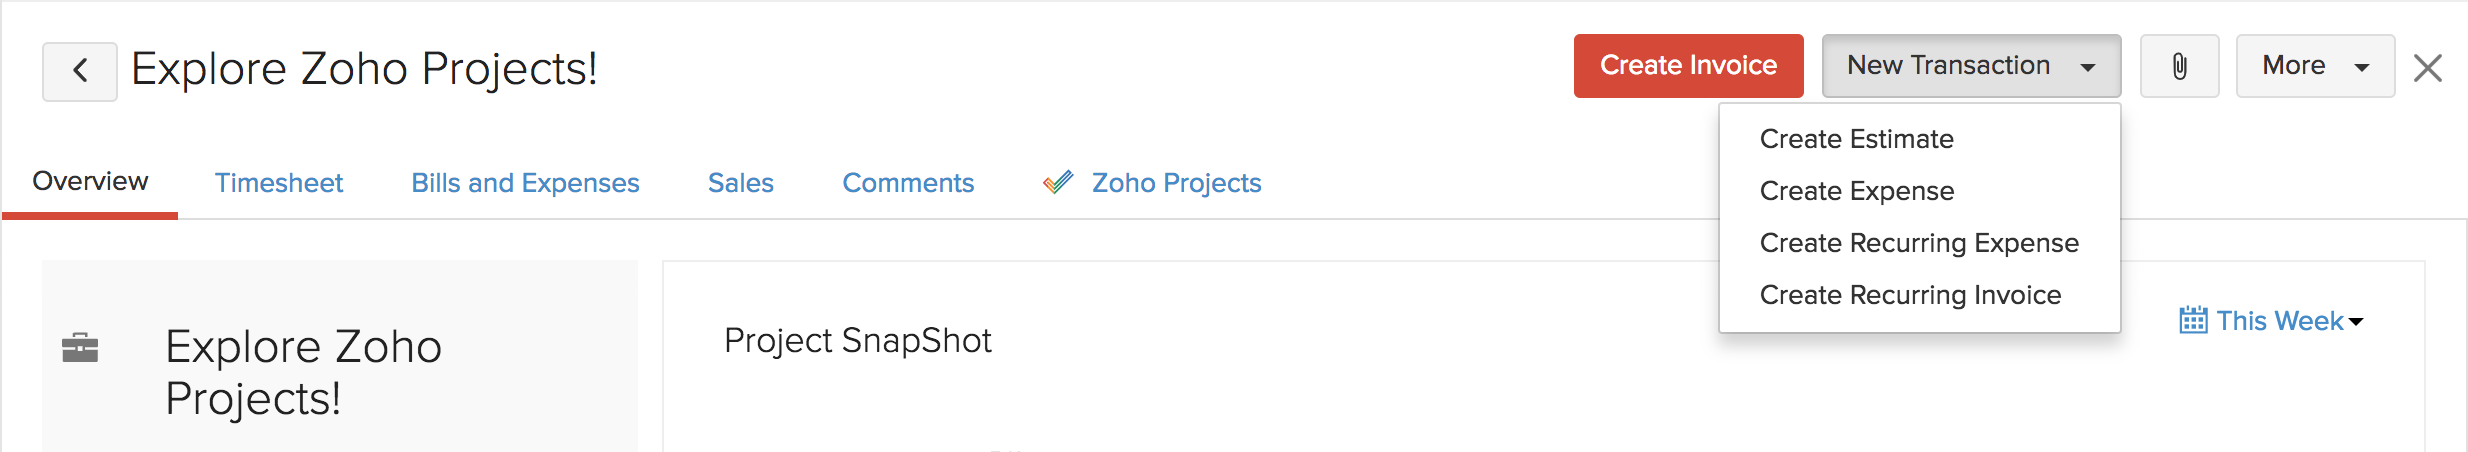 Zoho Projects Create Transactions